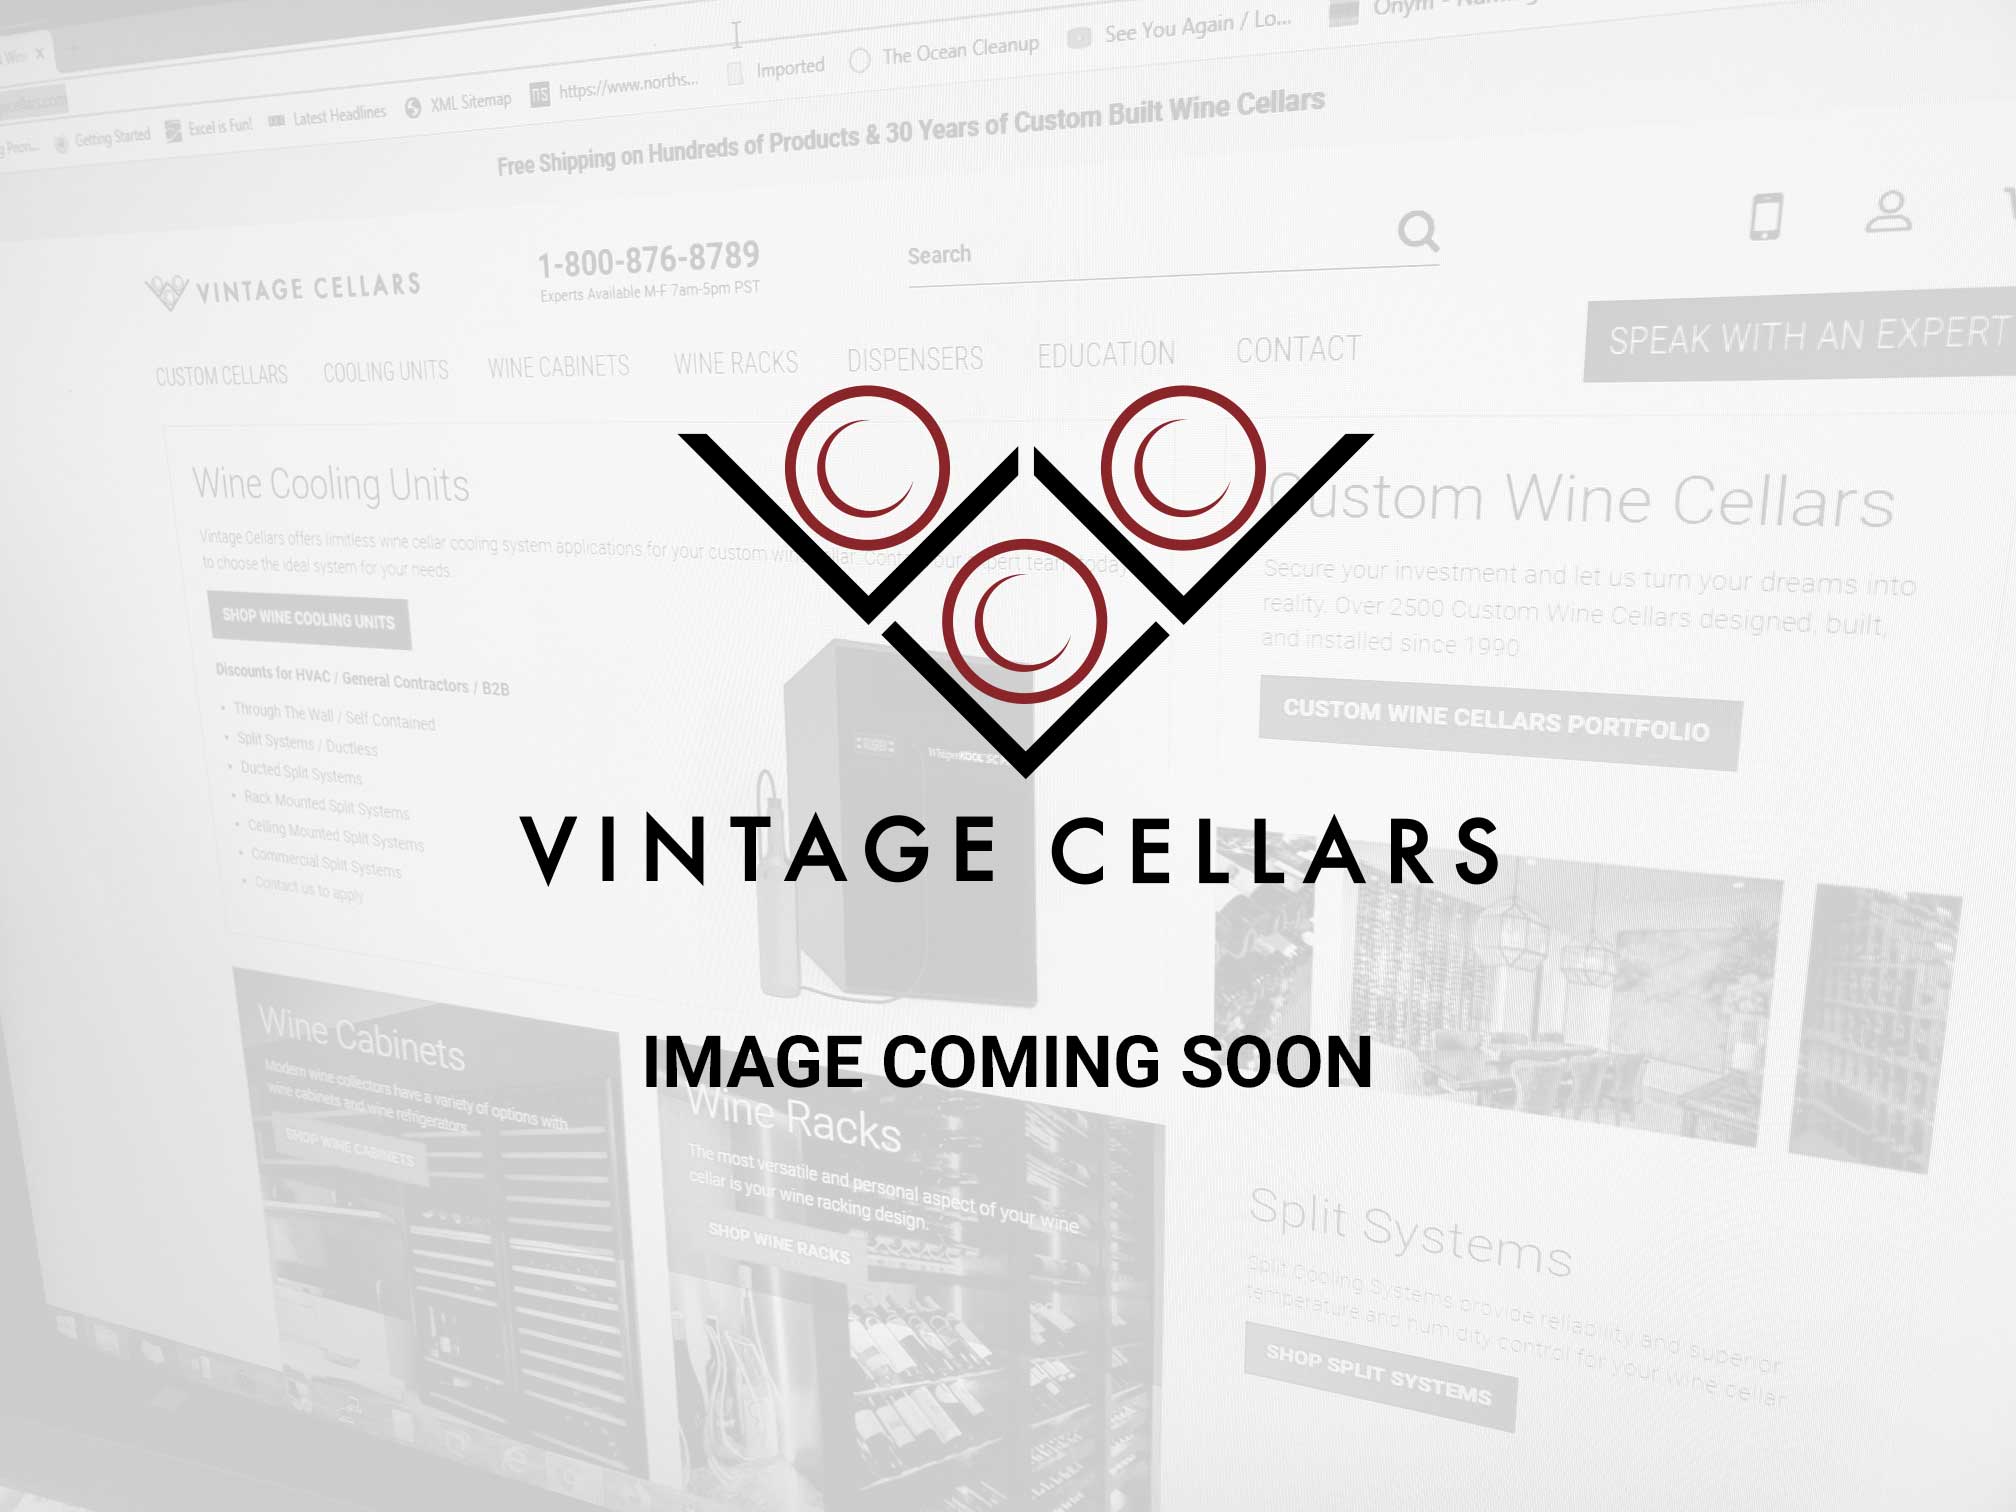 Manage Your Wine Cellar From Your iPad!